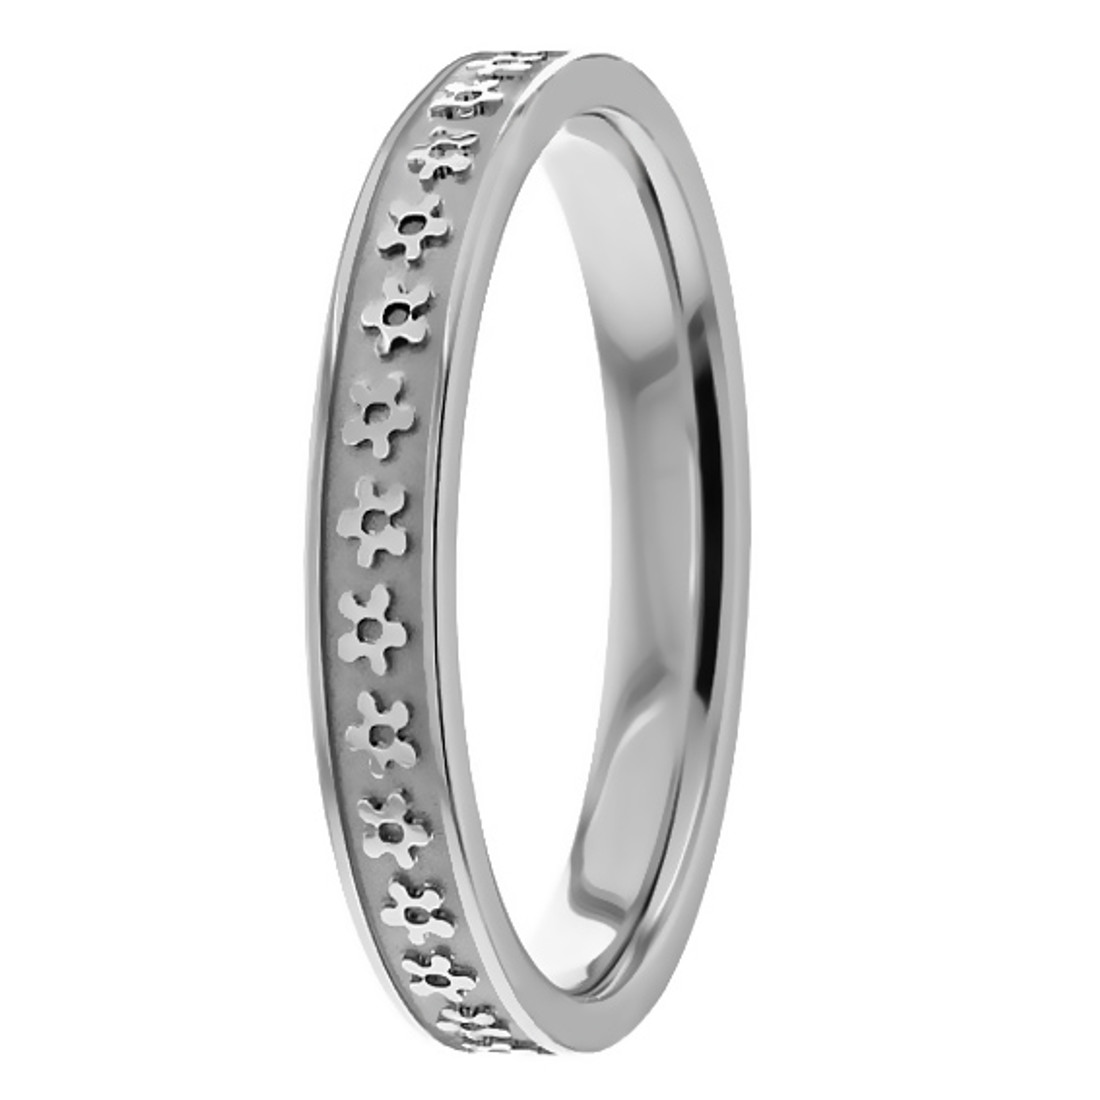 Floral Woman's Platinum Wedding Band Comfort-Fit Flower Ring